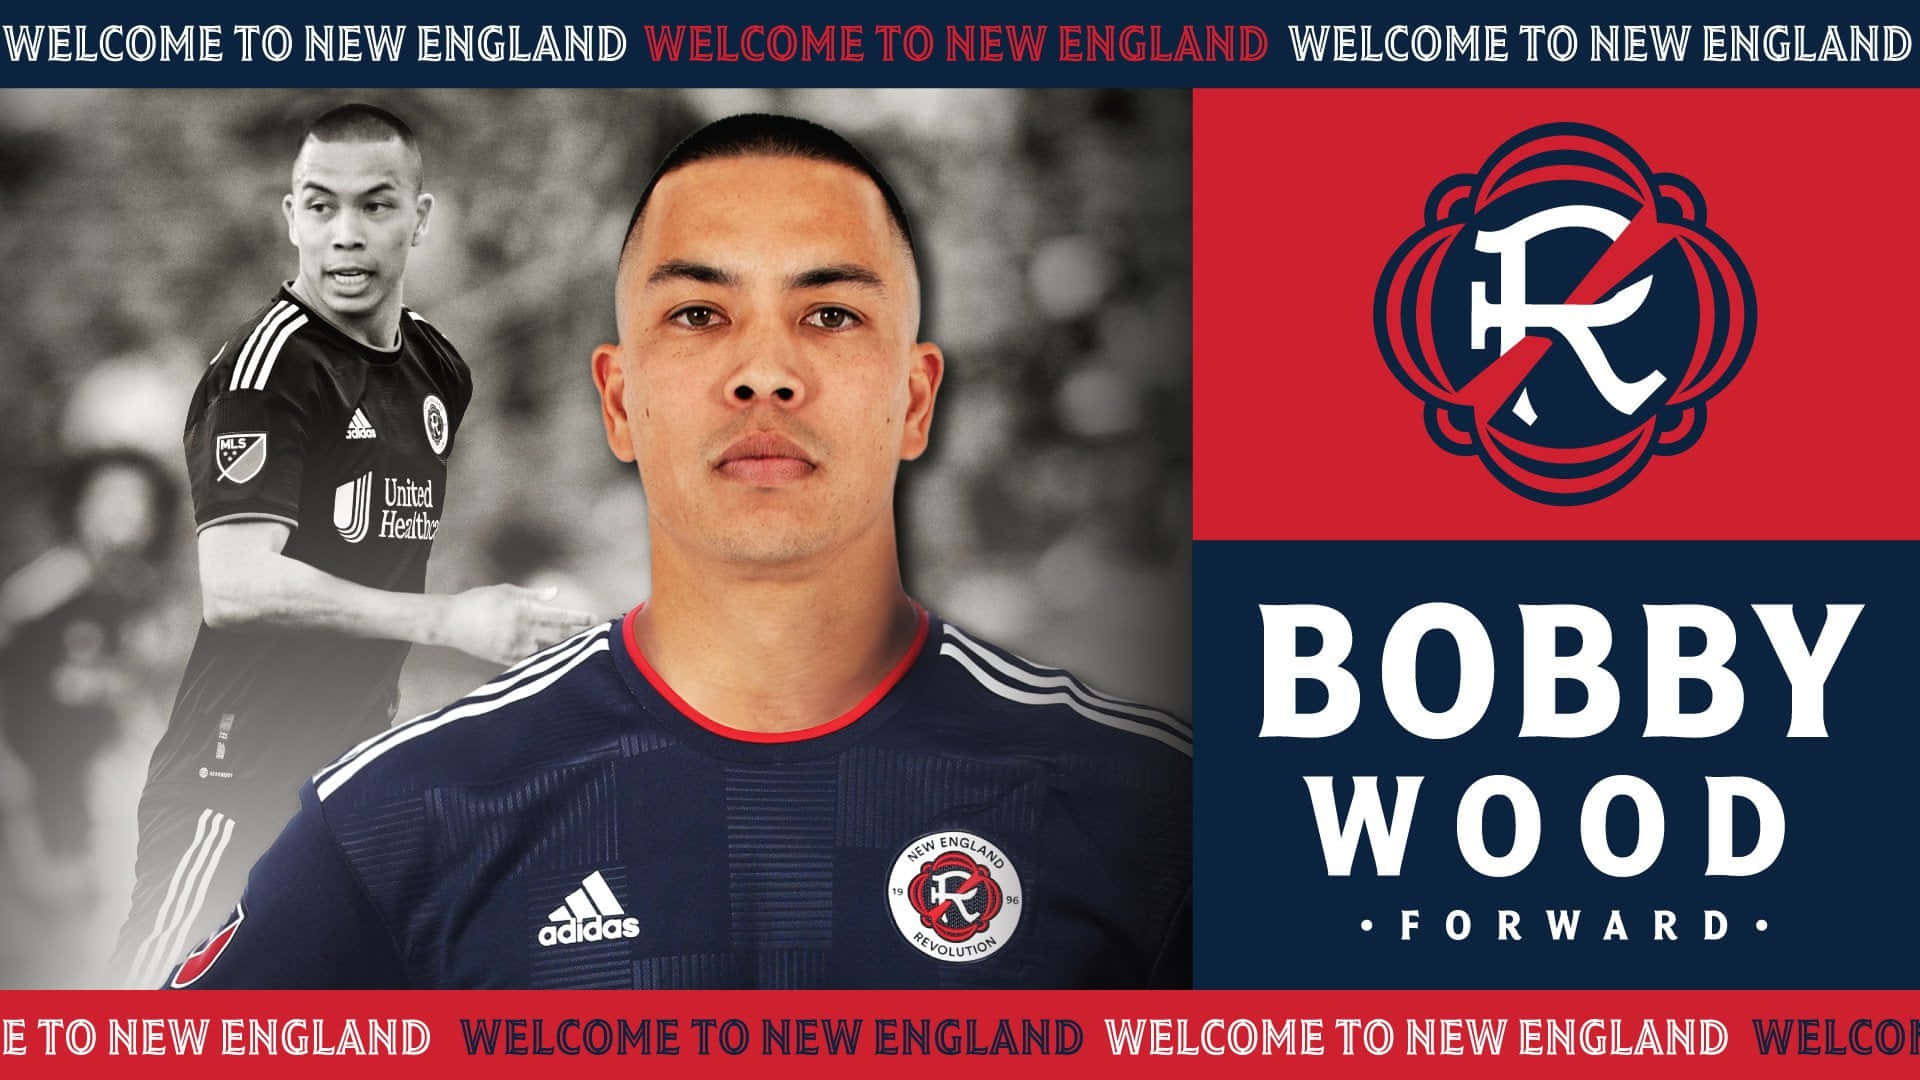 Bobby Wood New England Team Welcome Poster Wallpaper